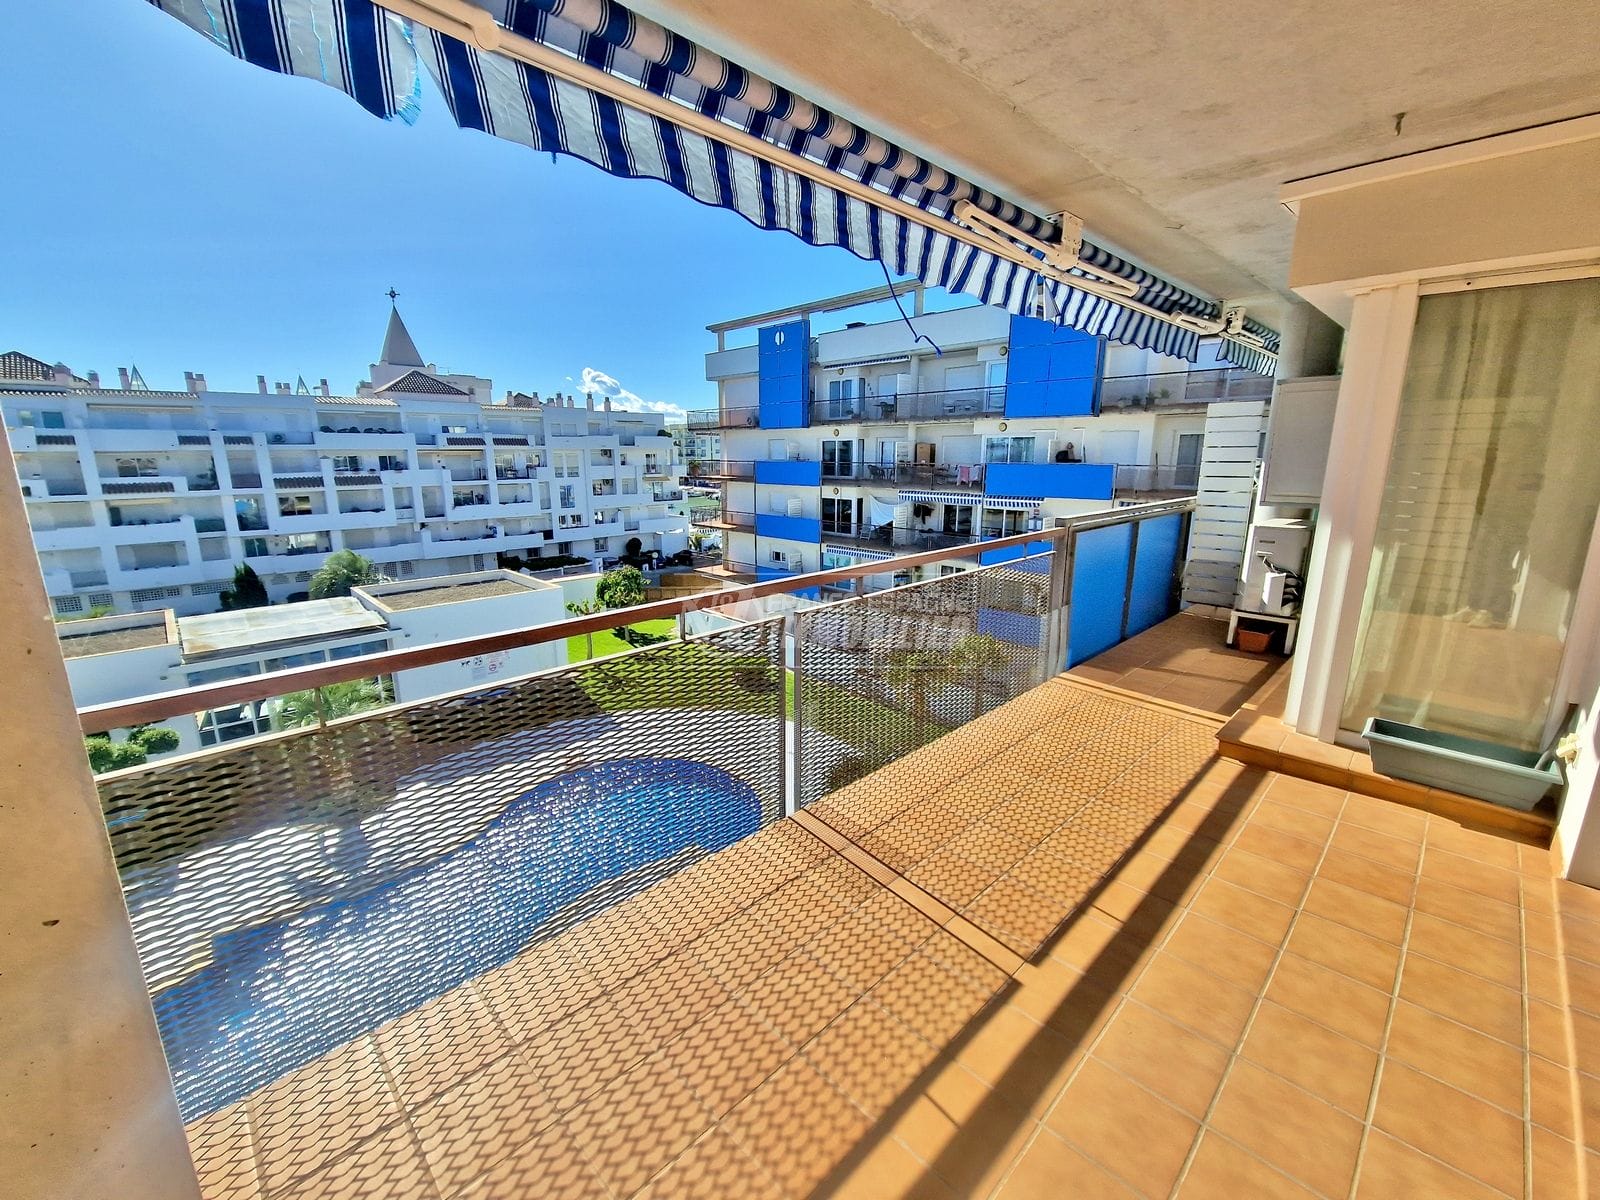 Exclusivite Roses - Beautiful apartment, private parking, shared pool